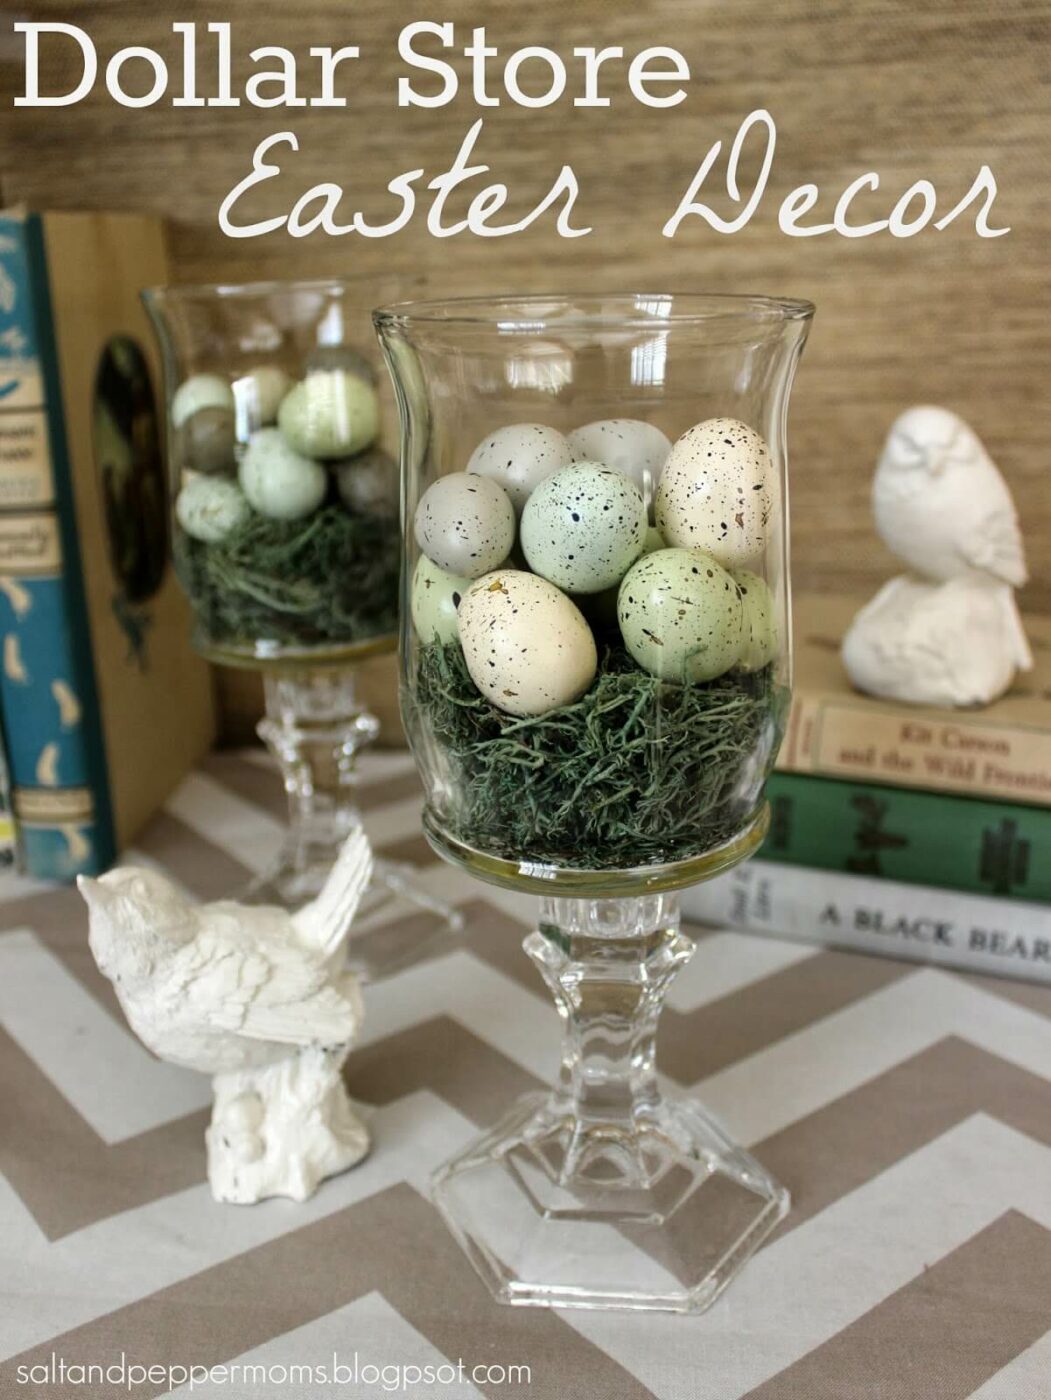 Country Charm Easter Egg Jar